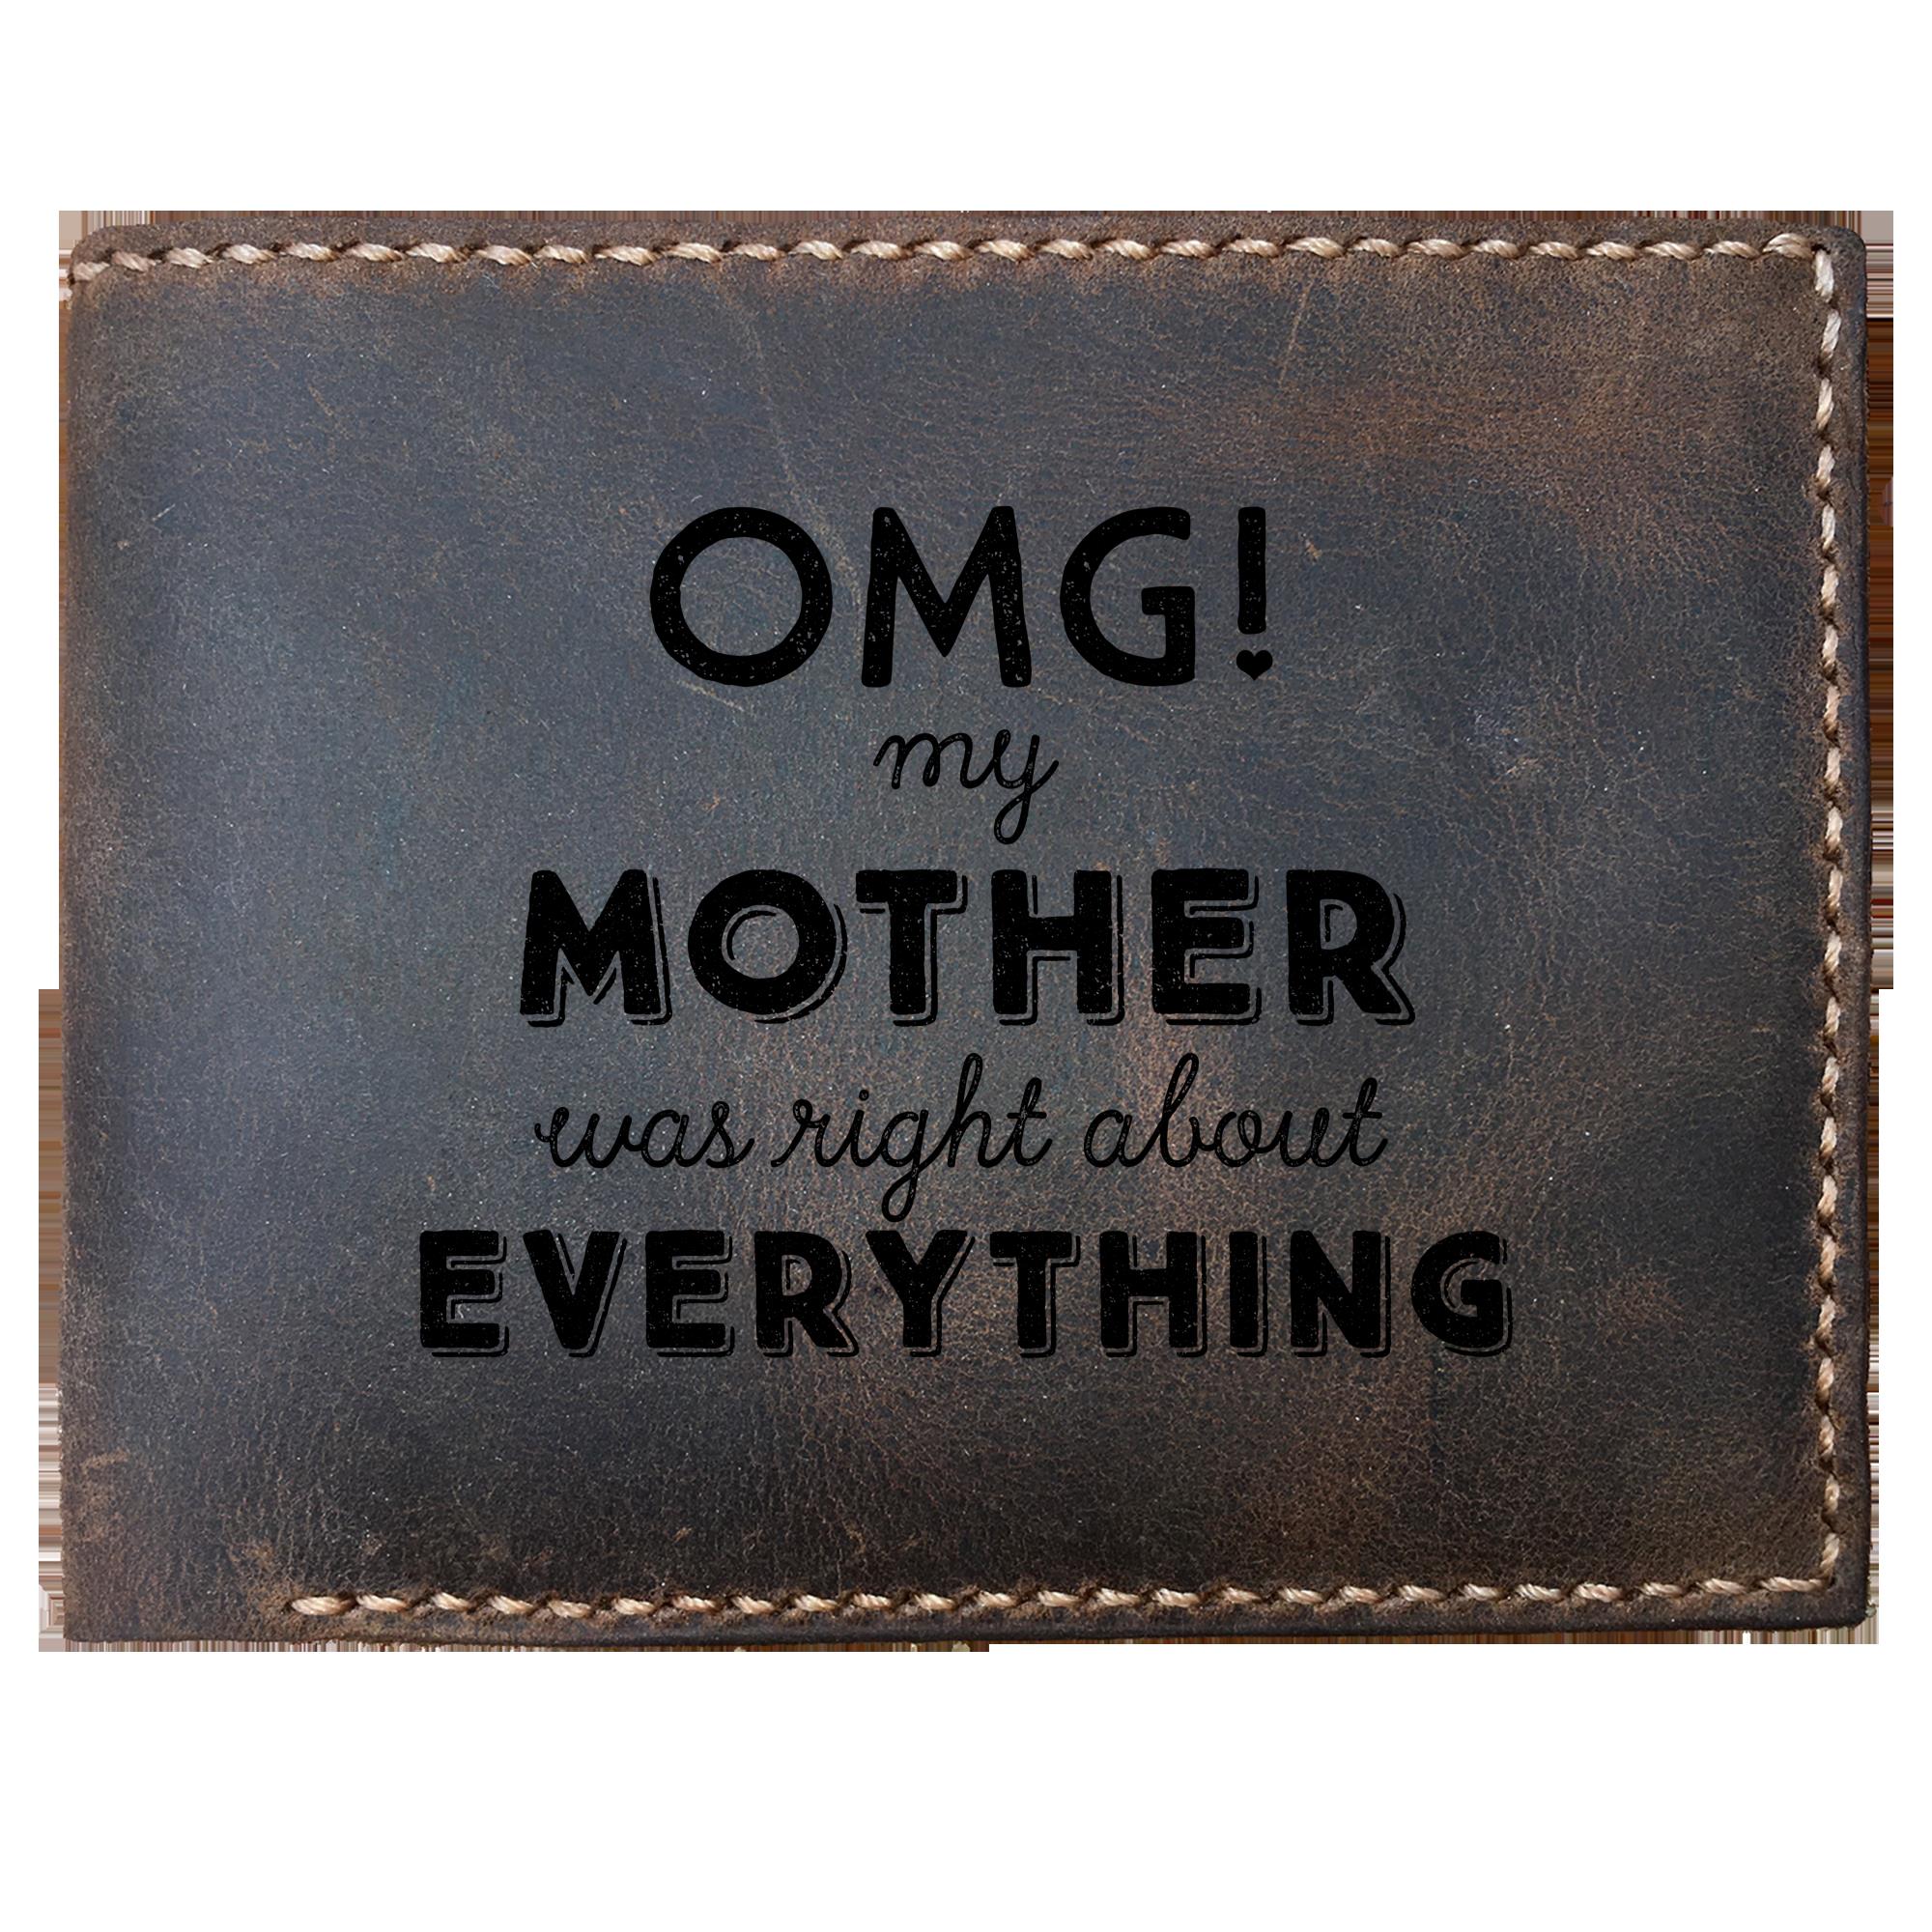 Skitongifts Funny Custom Laser Engraved Bifold Leather Wallet For Men, Omg Mom Was Right About Everything